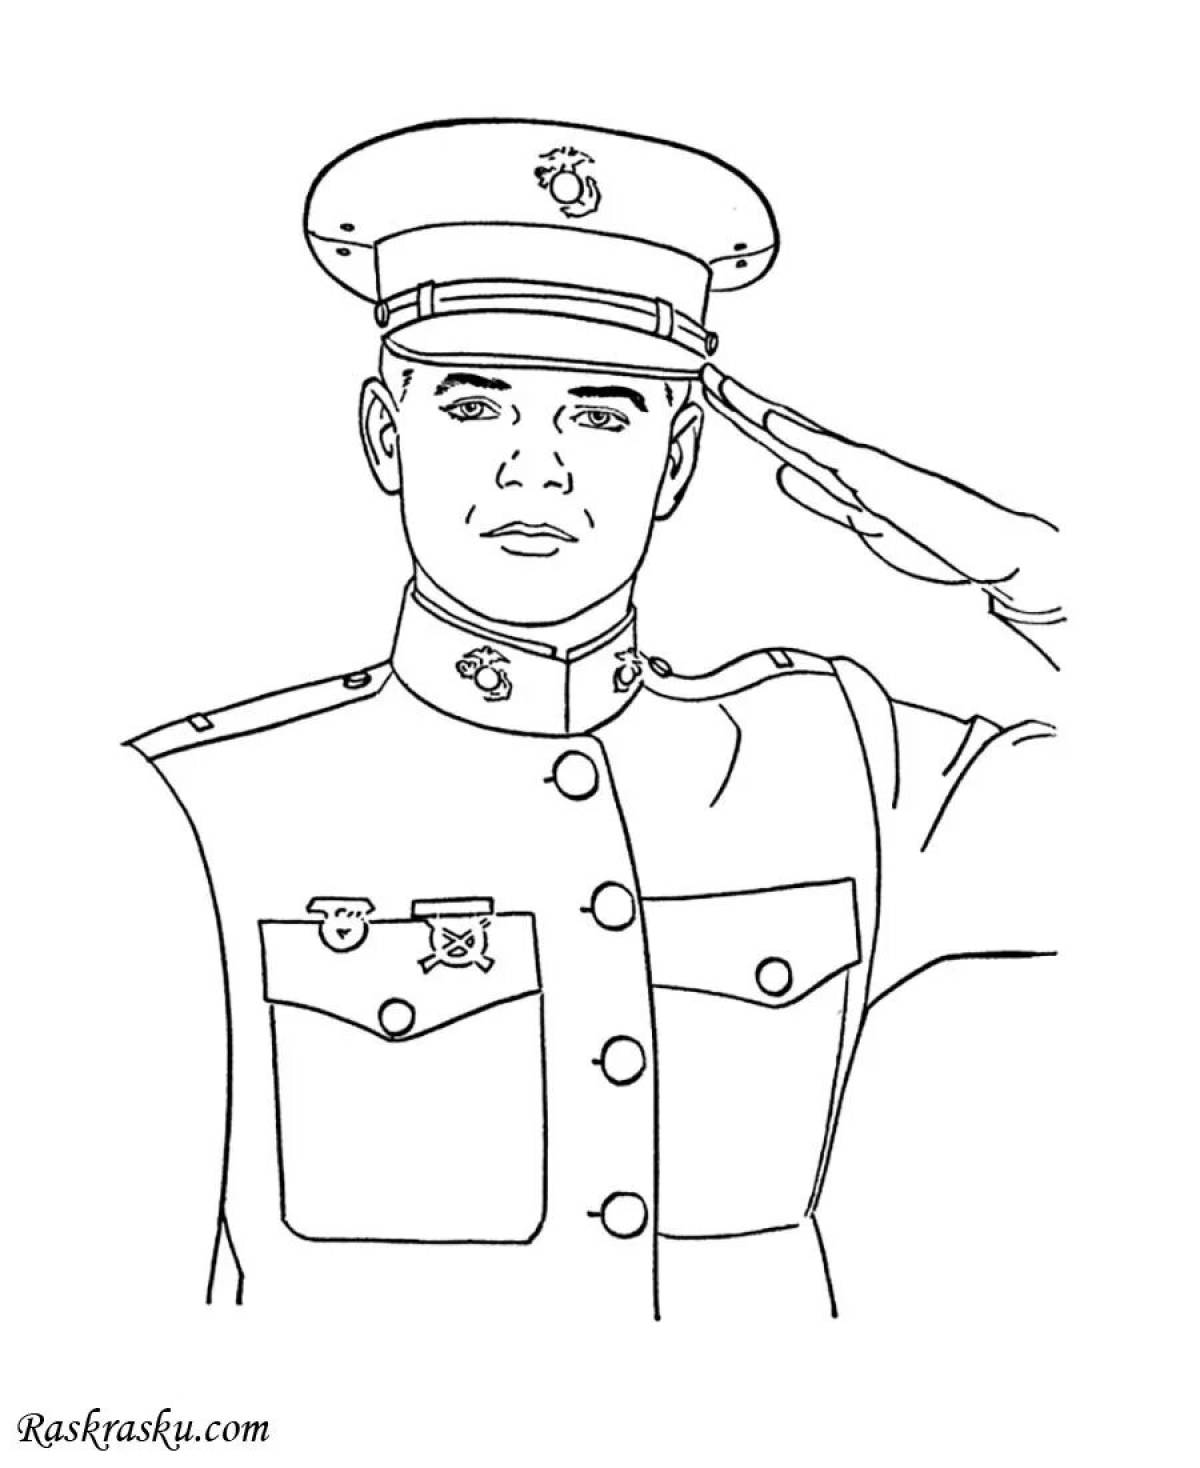 Coloring page magnanimous soldier hero